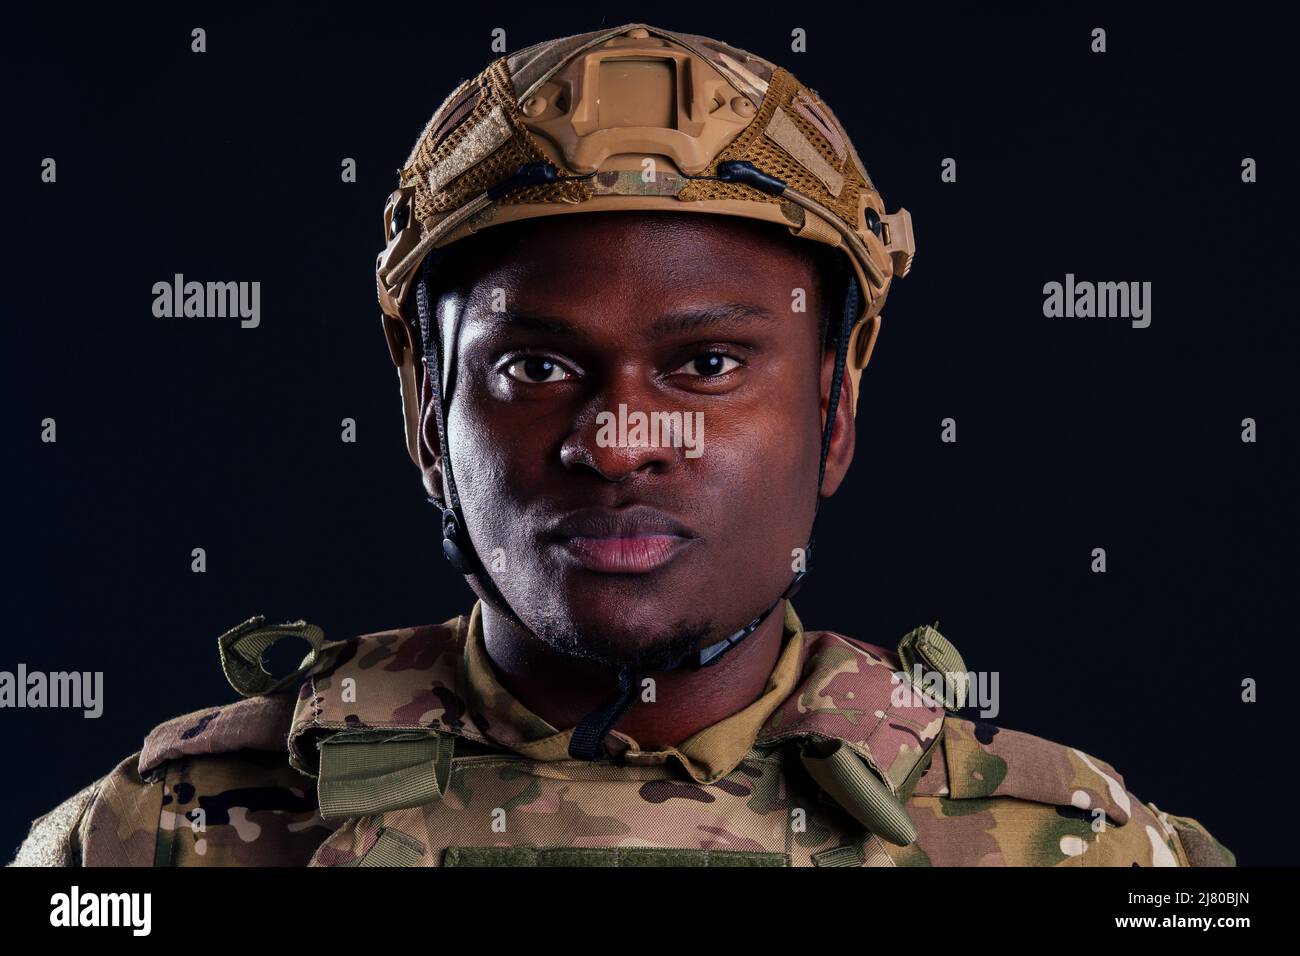 military army african male warrior camouflage suit sorrow sadness wrapped in an American flag black background studio, lying violence news criminal Stock Photo